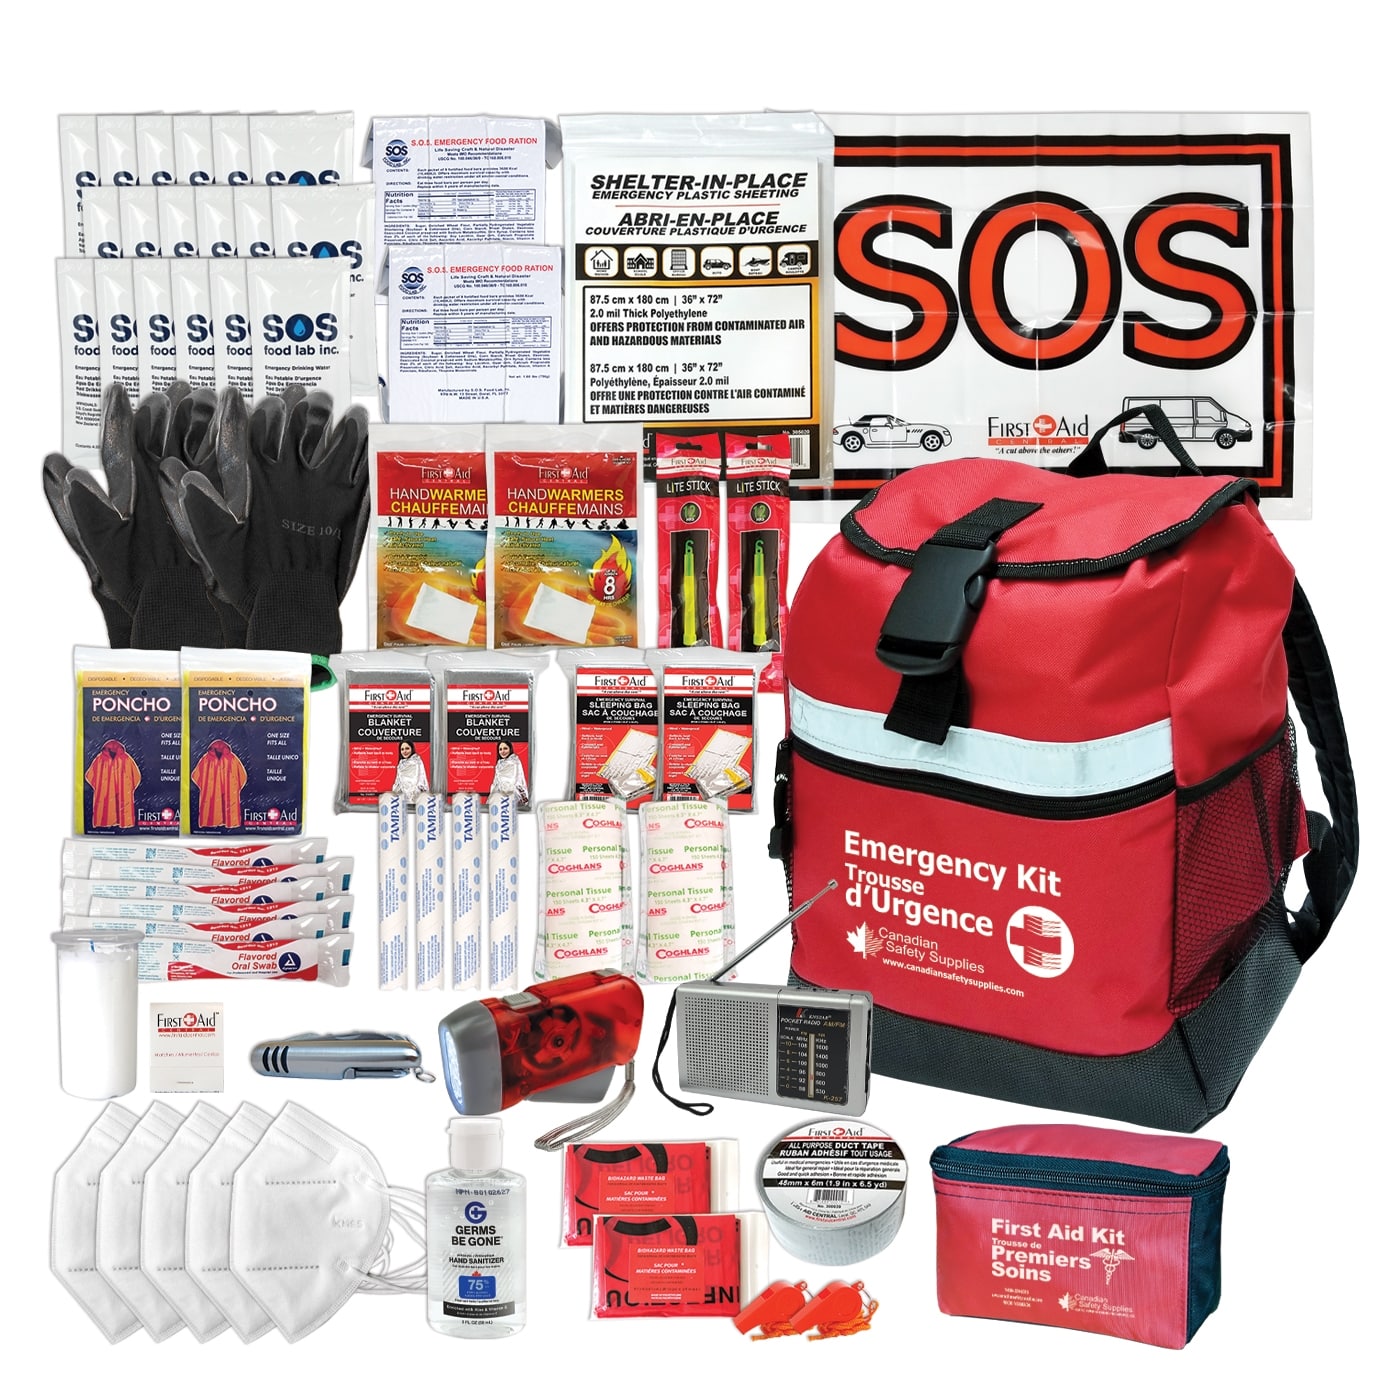  Emergency Survival Kits and Equipment